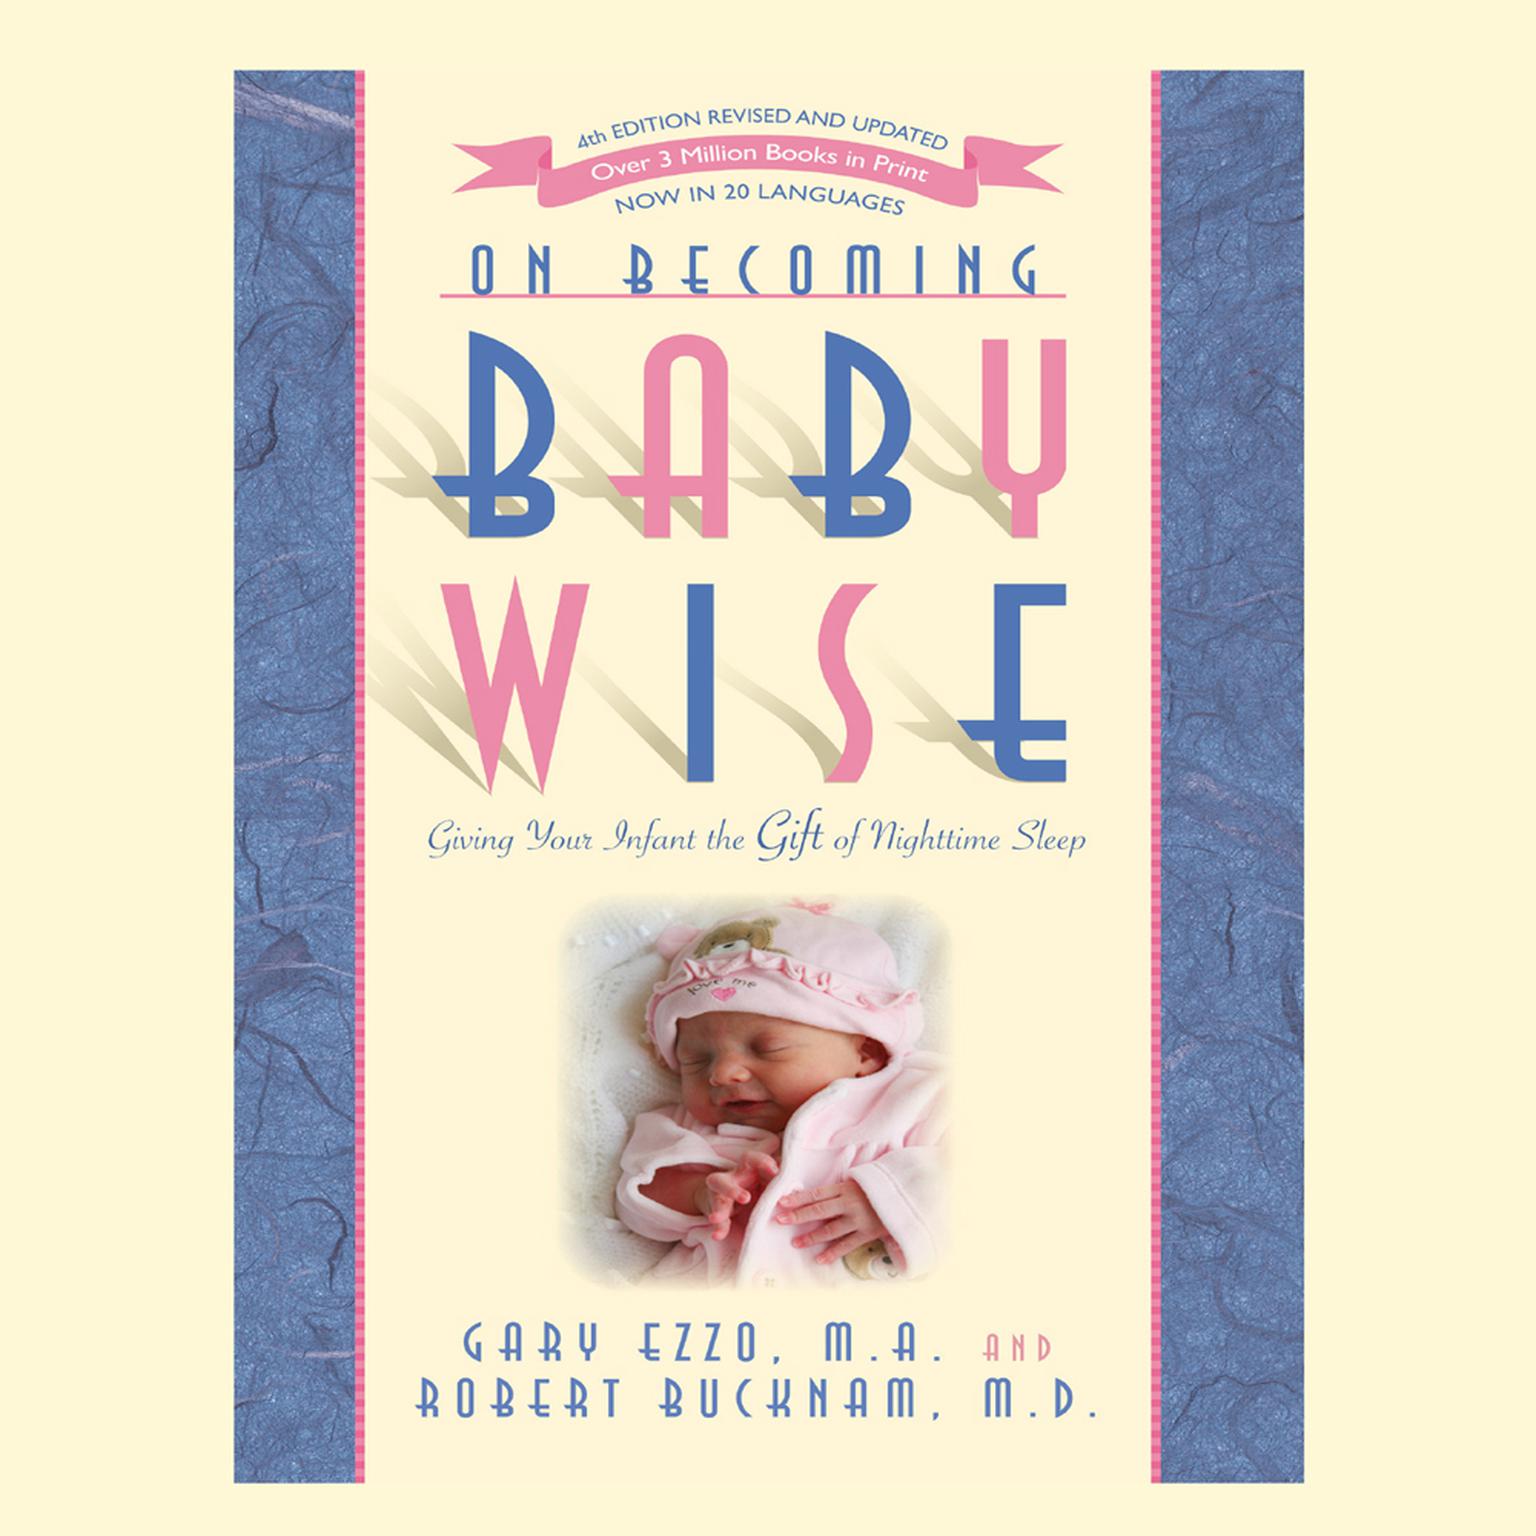 On Becoming Babywise: Giving Your Infant the Gift of Nighttime Sleep Audiobook, by Gary Ezzo